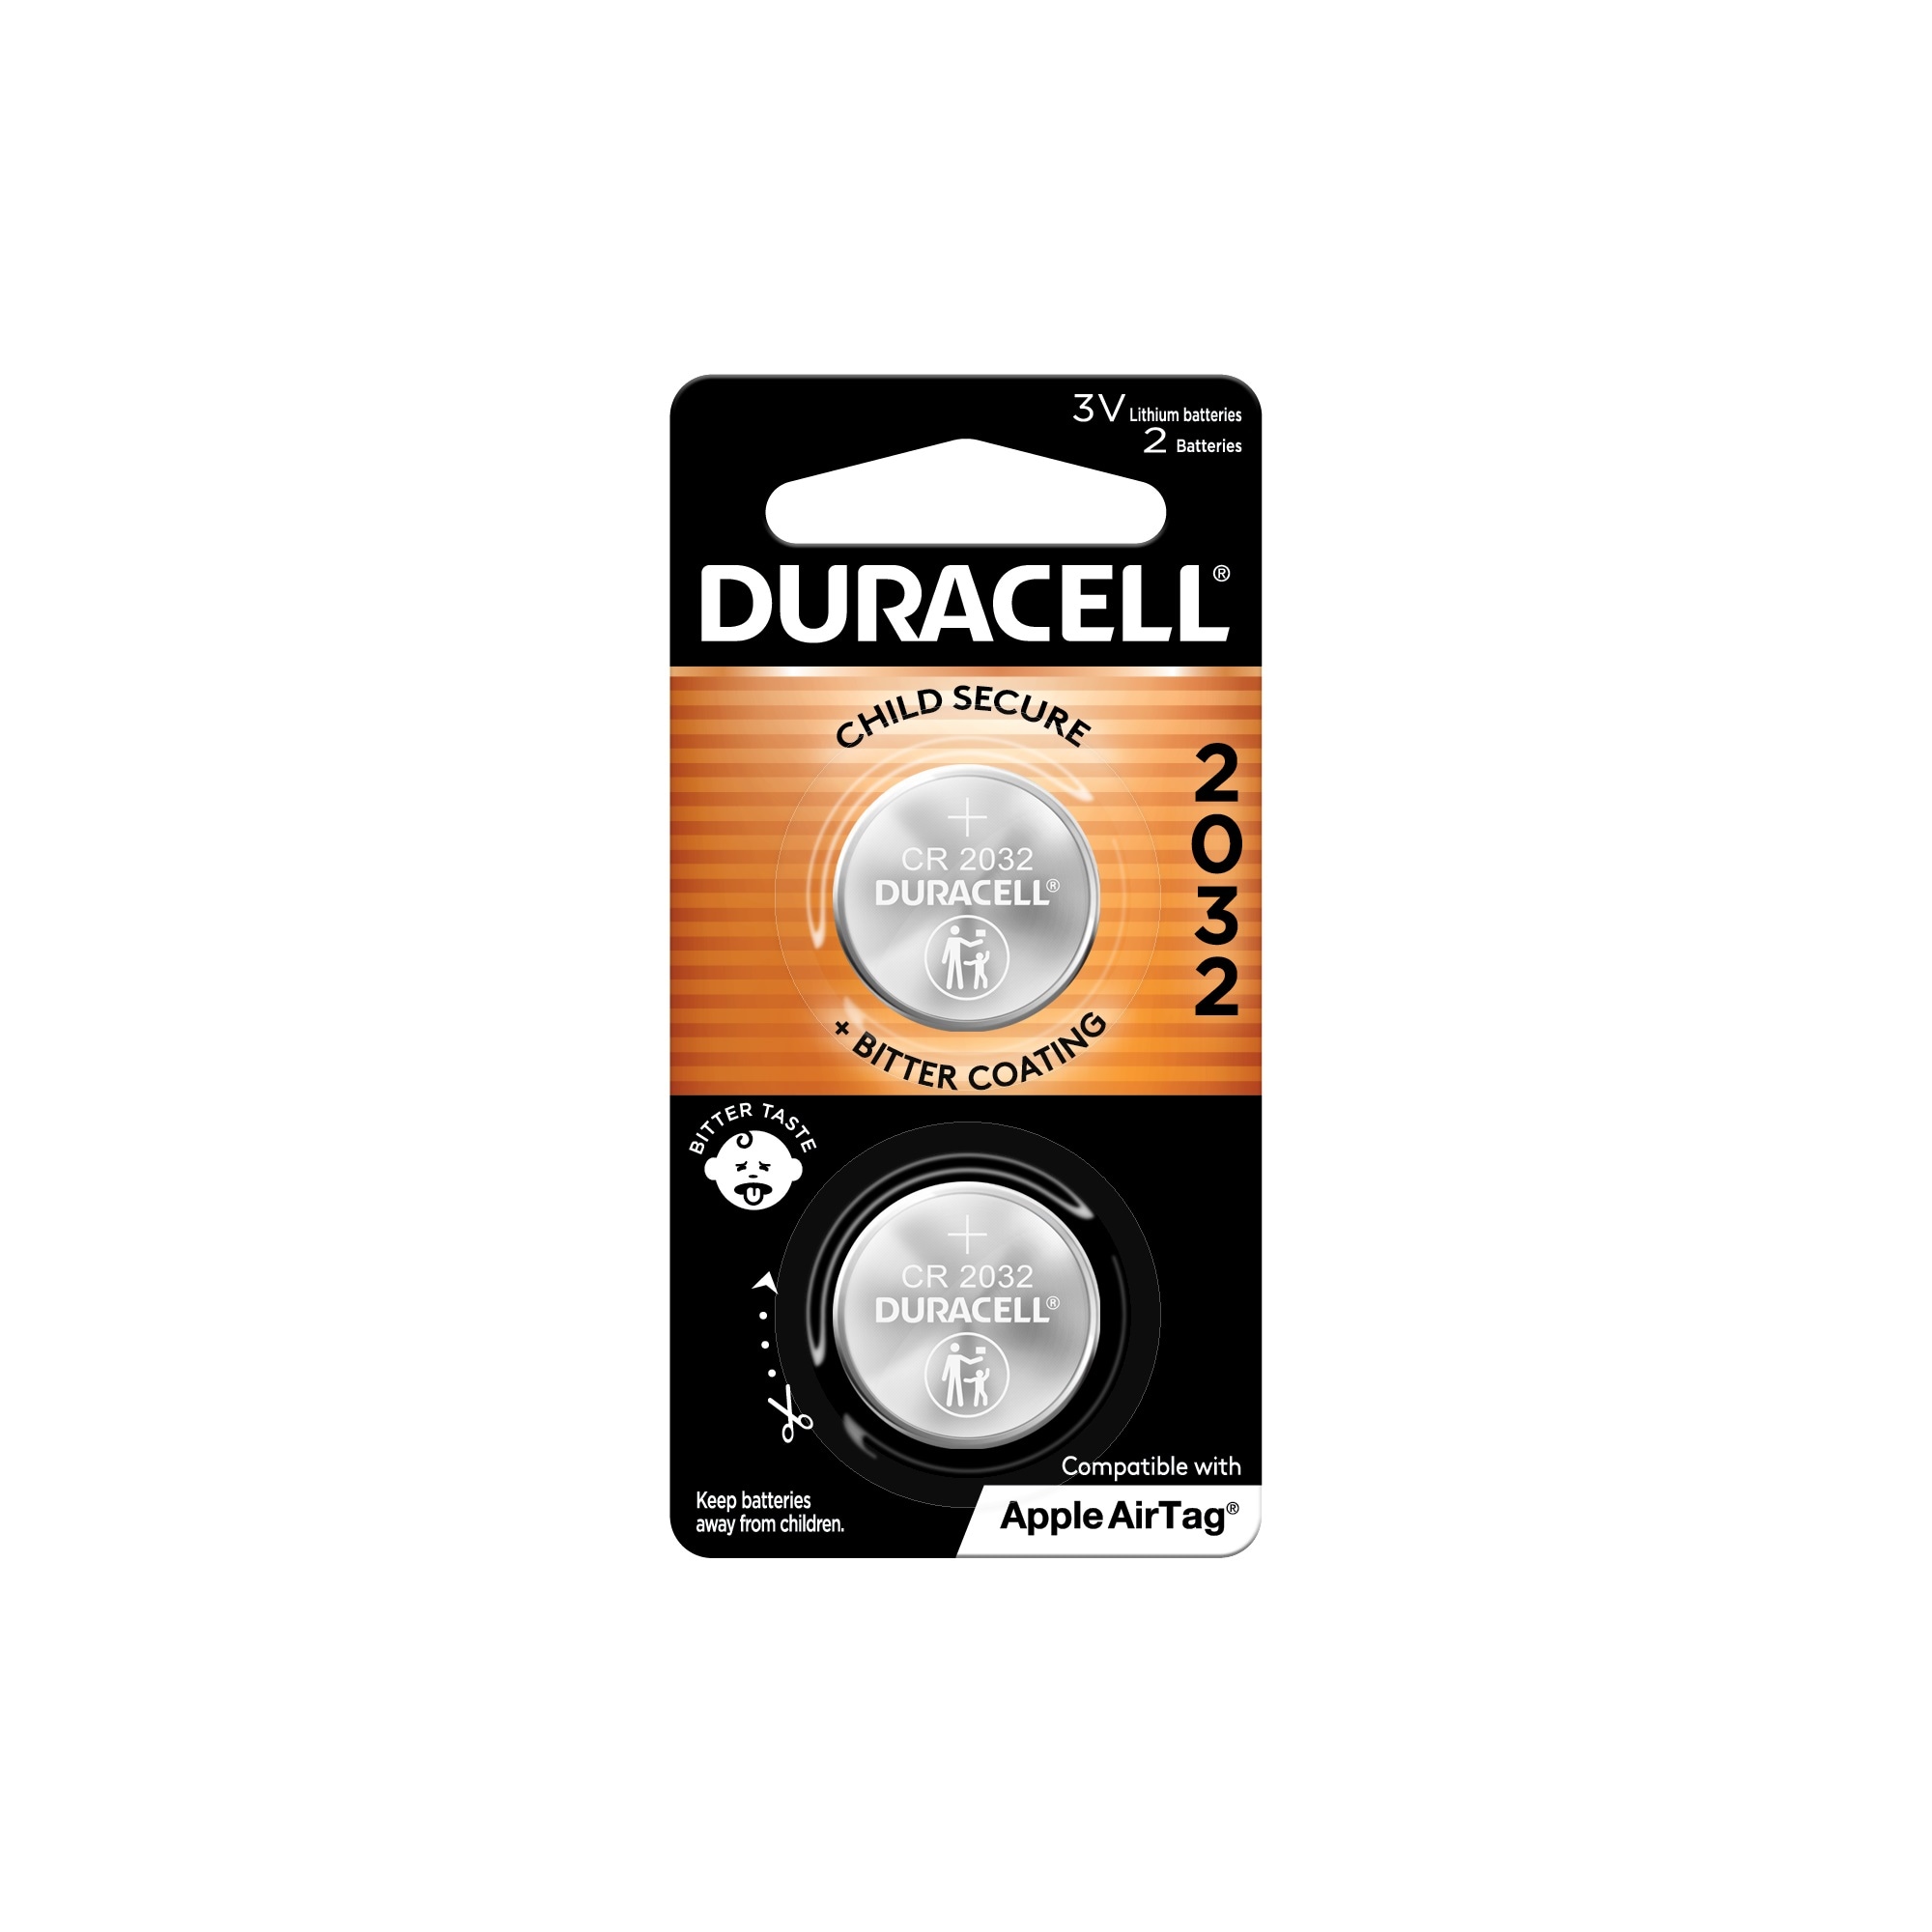 Duracell 2032 3V Lithium Coin Battery, 8/Pack